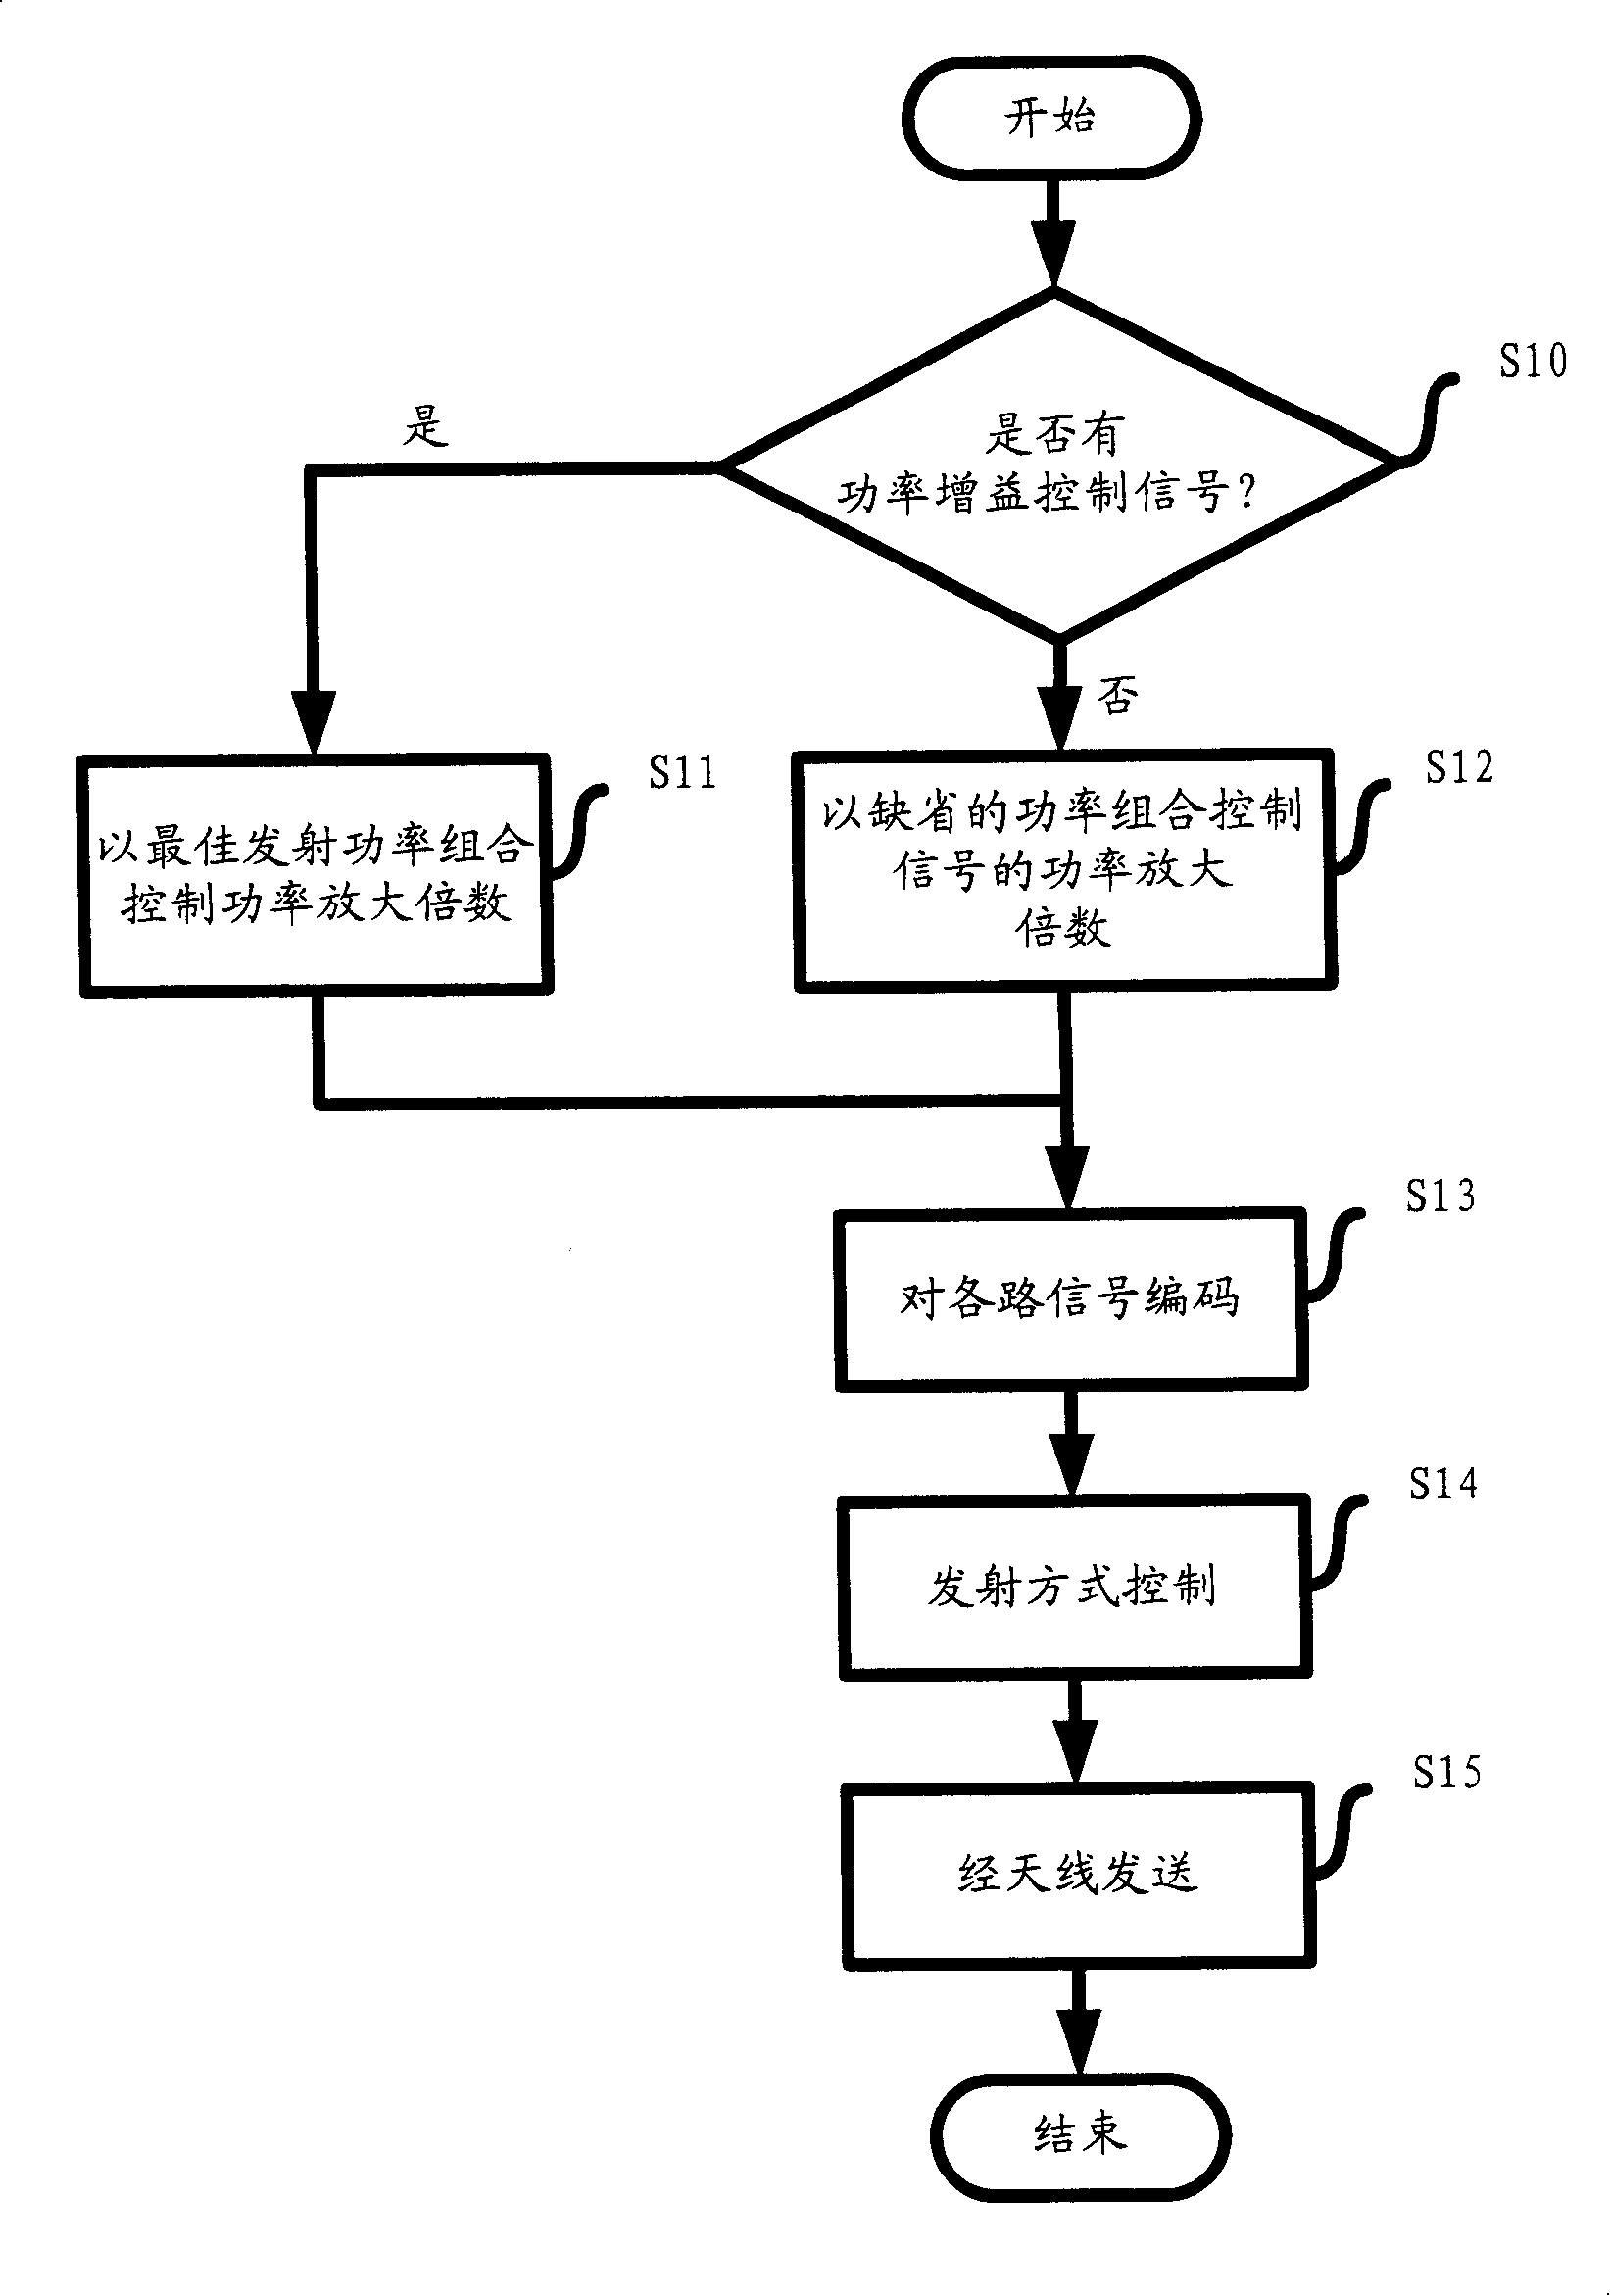 Apparatus and method for transferring multipath signal by non-equilibrium power in MIMO system